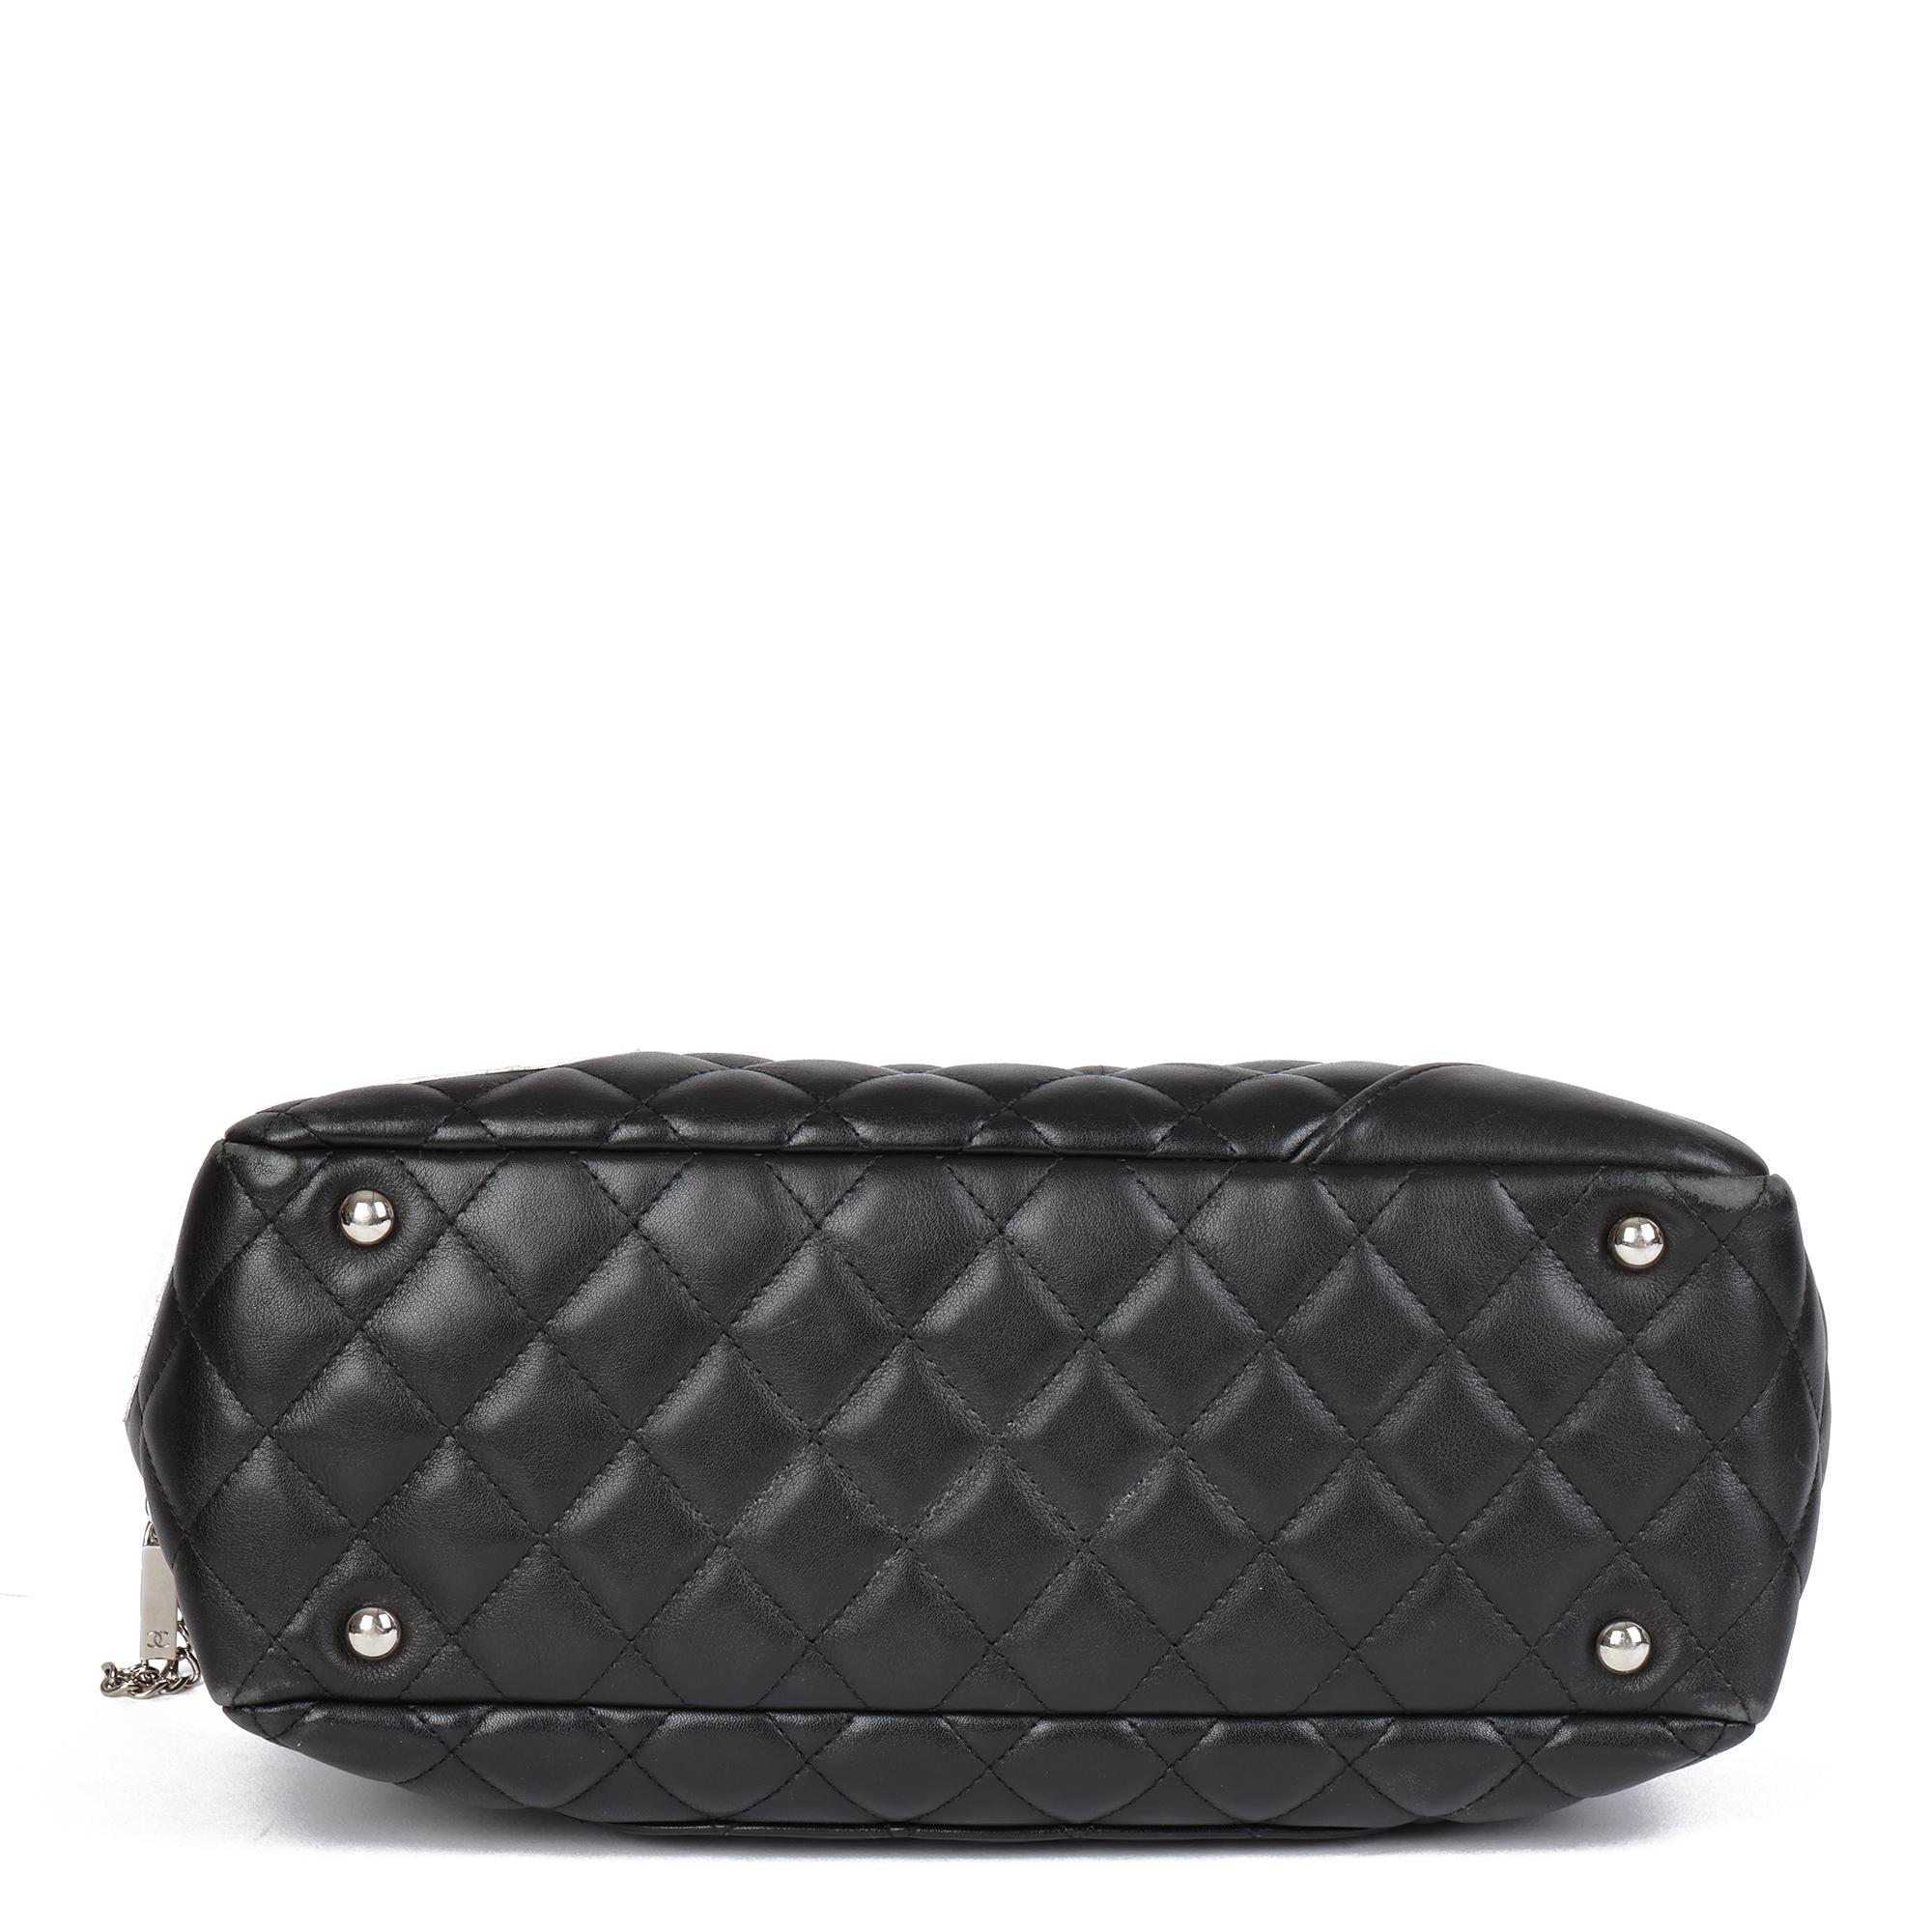 CHANEL Black & White Quilted Lambskin Large Cambon Bowler 2